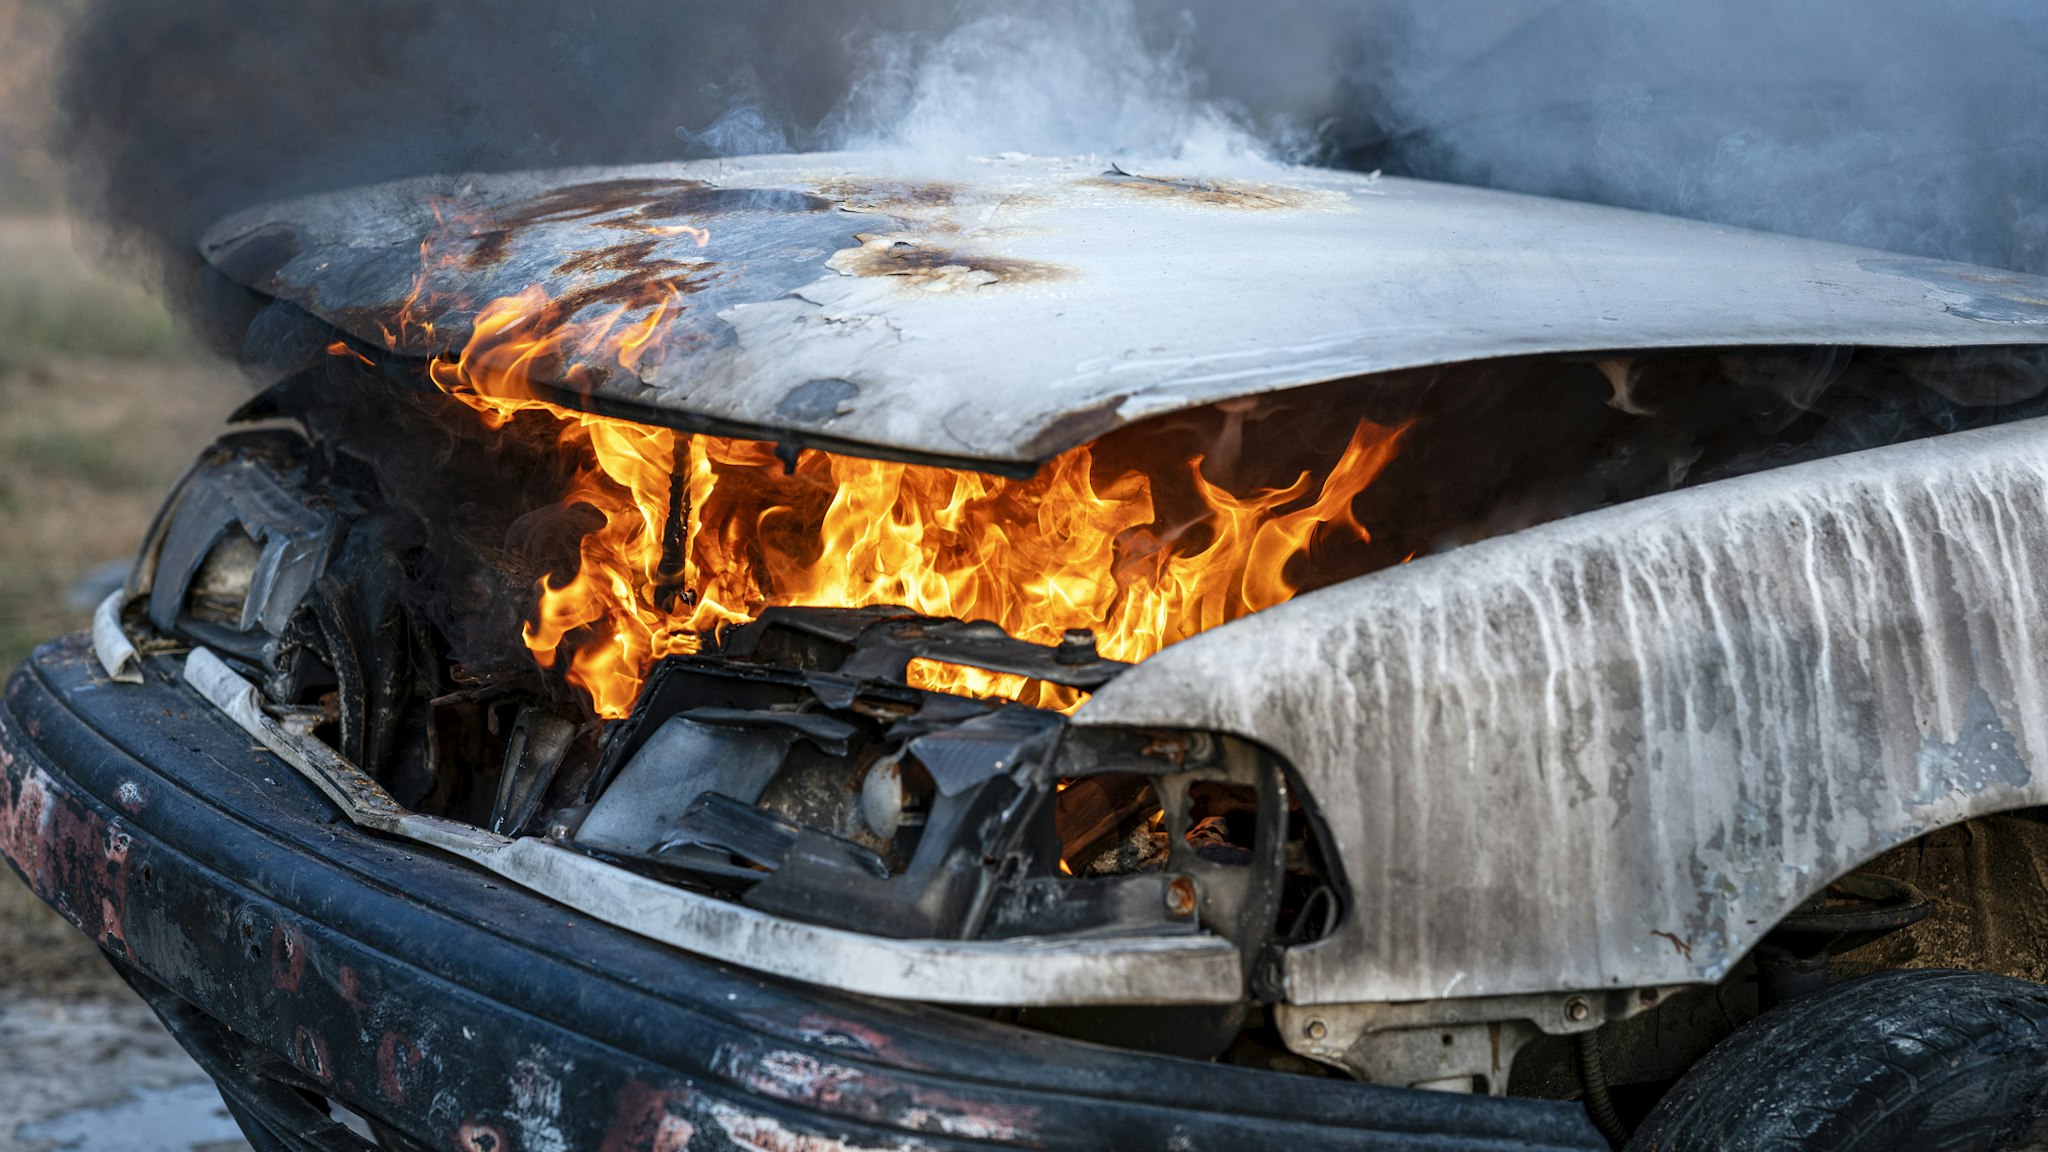 Close-up of burning car engine after a frontal crash collision on the roadside with flame and smoke. - stock photo